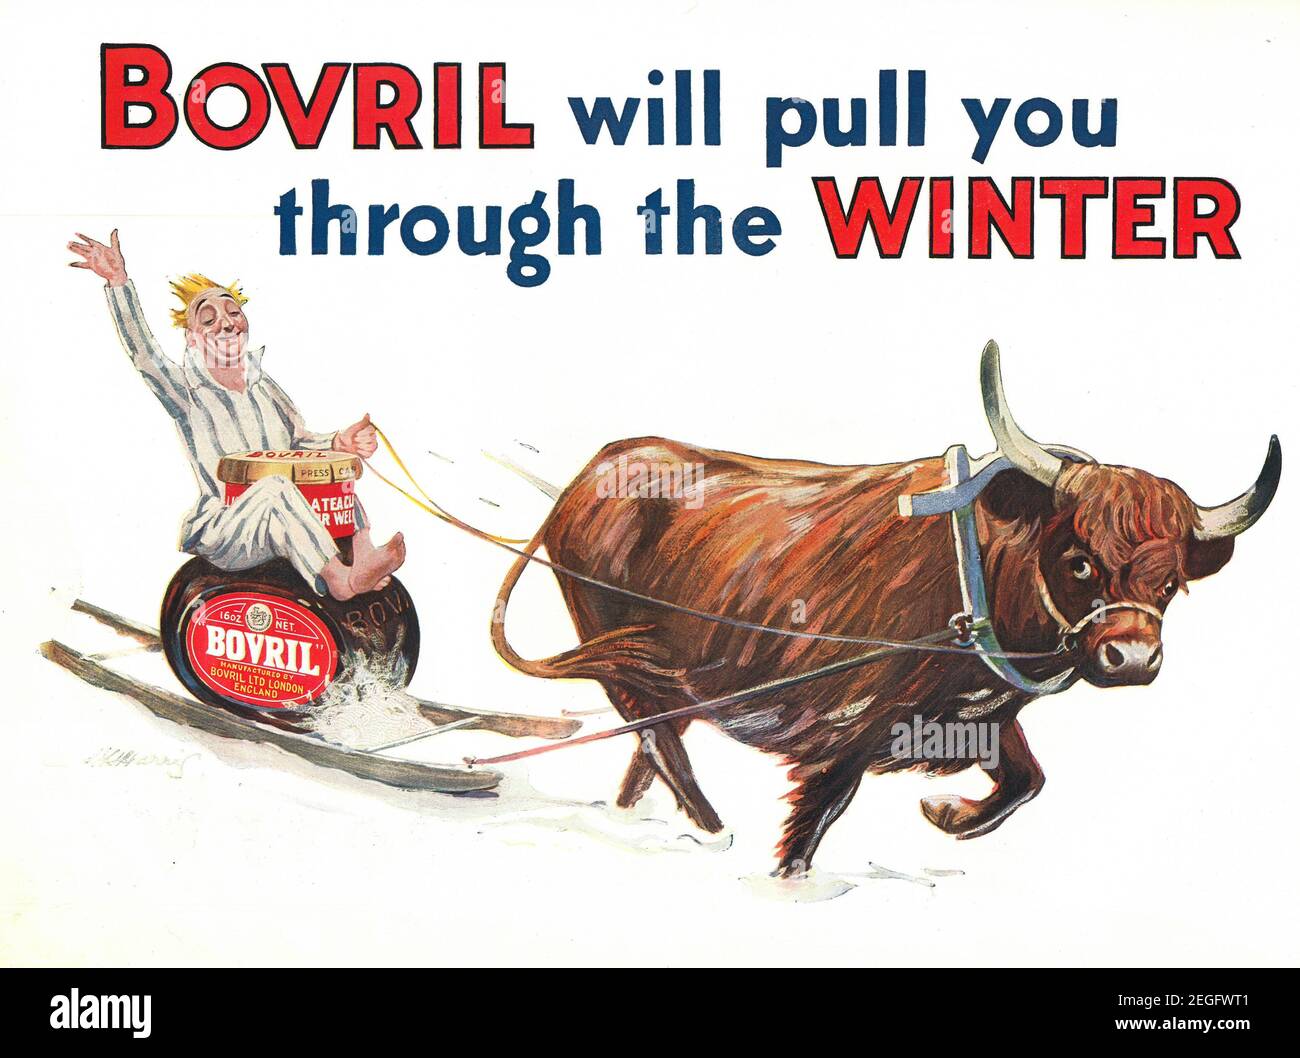 Vintage paper ad advert advertisement of Bovril, Bovril will pull you through the winter, 1927, 20s Stock Photo